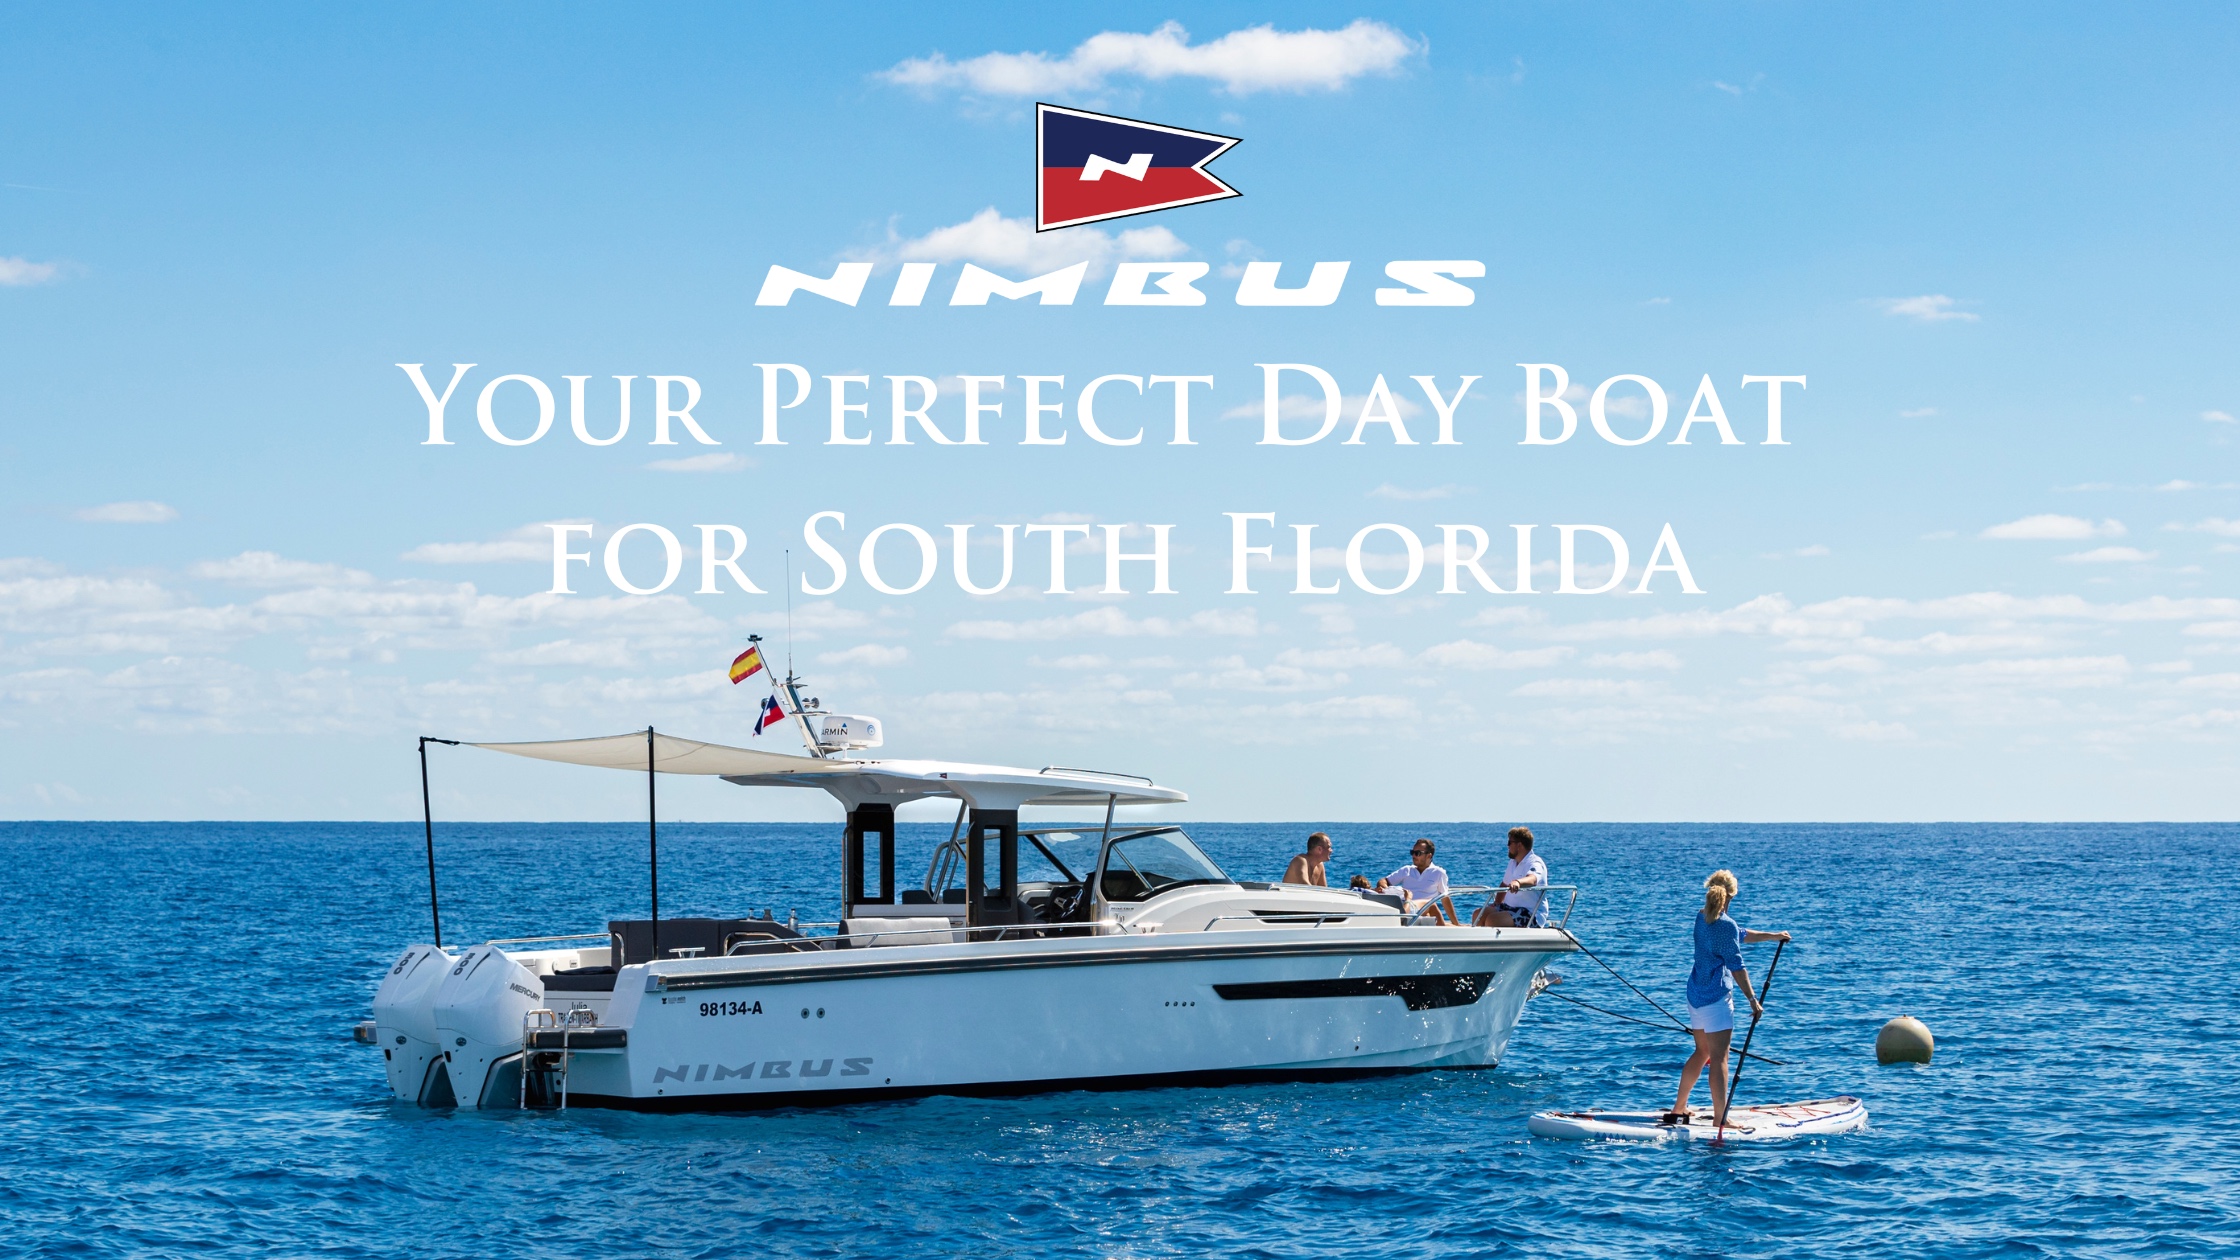 Meet Nimbus, the Perfect Day Boat for South Florida